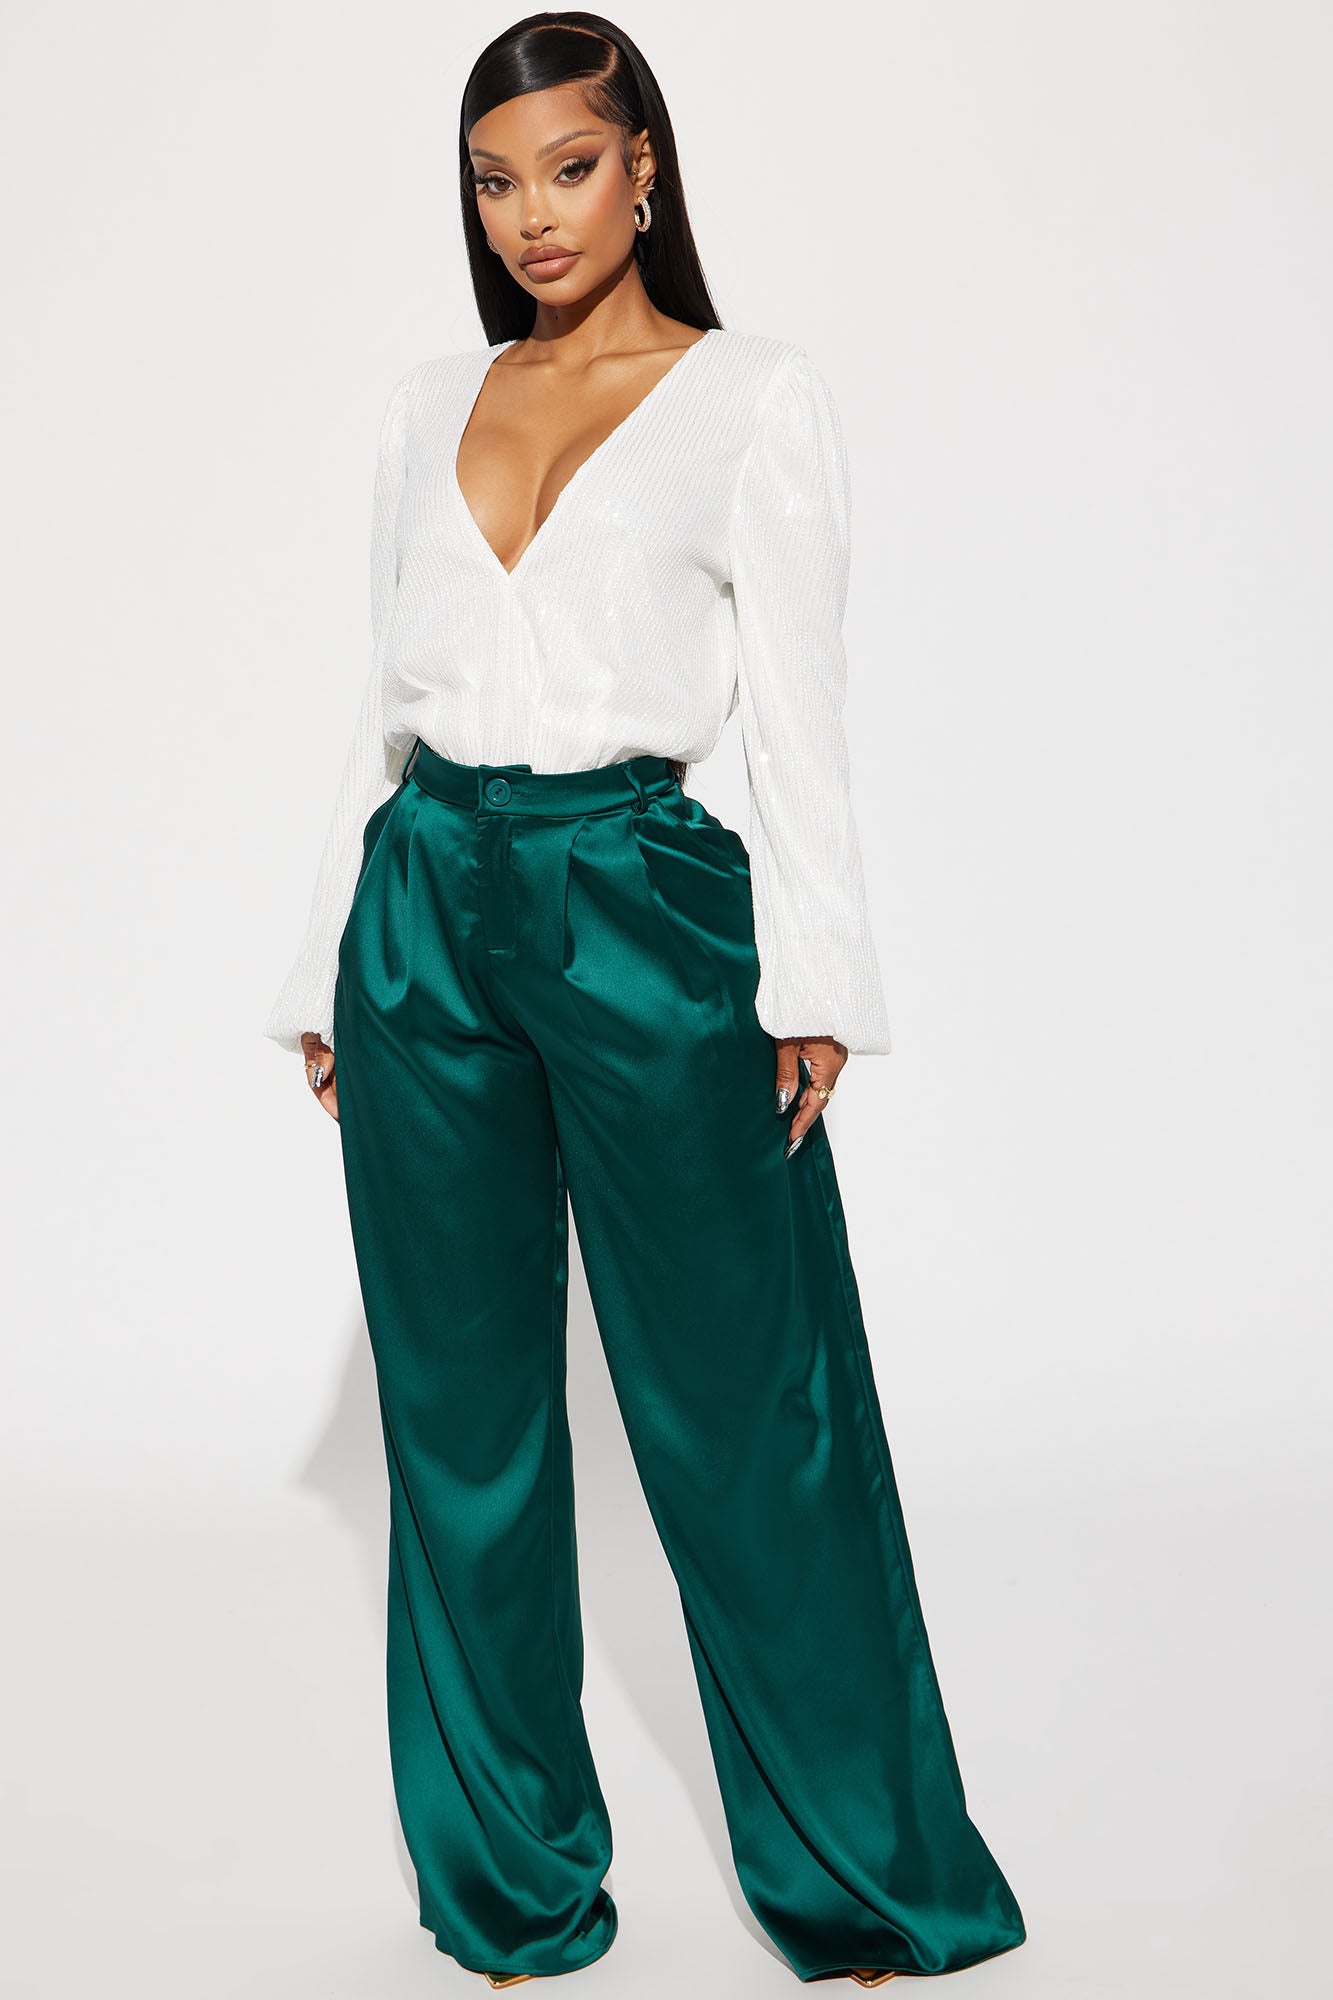 Satin trousers: 15 best satin trousers to shop now